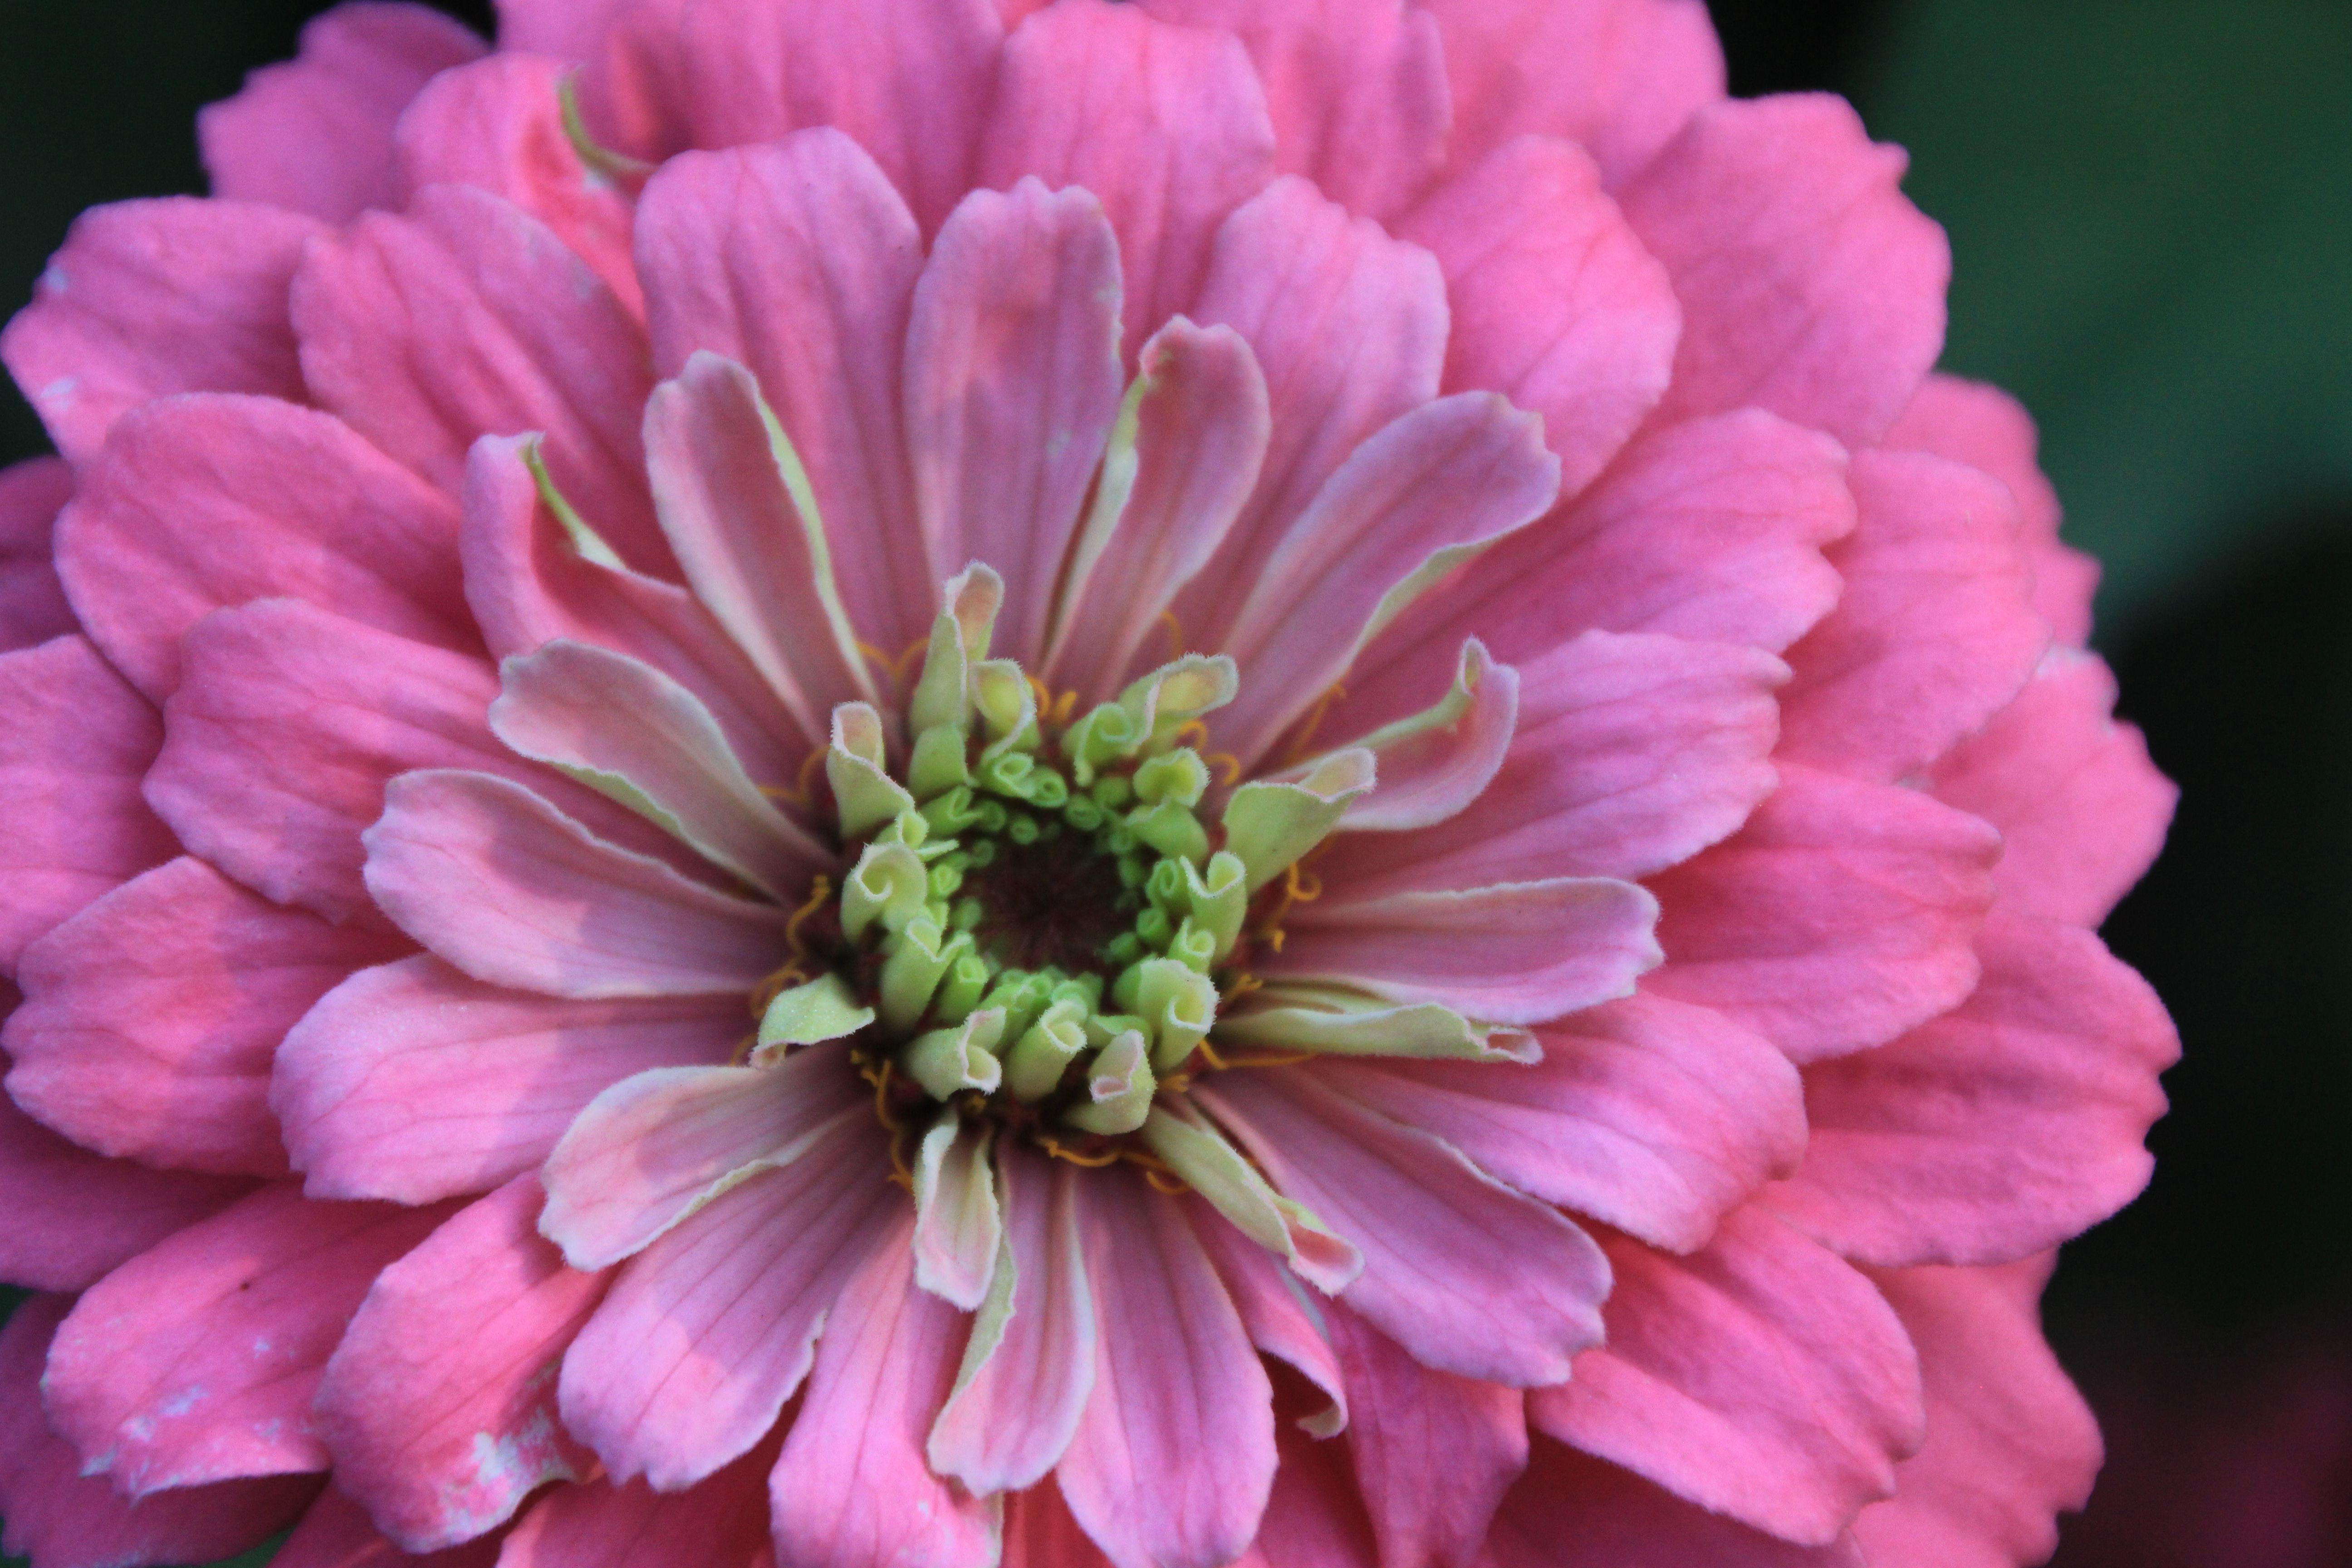 A large, bright, pink flower with a light green and white center.